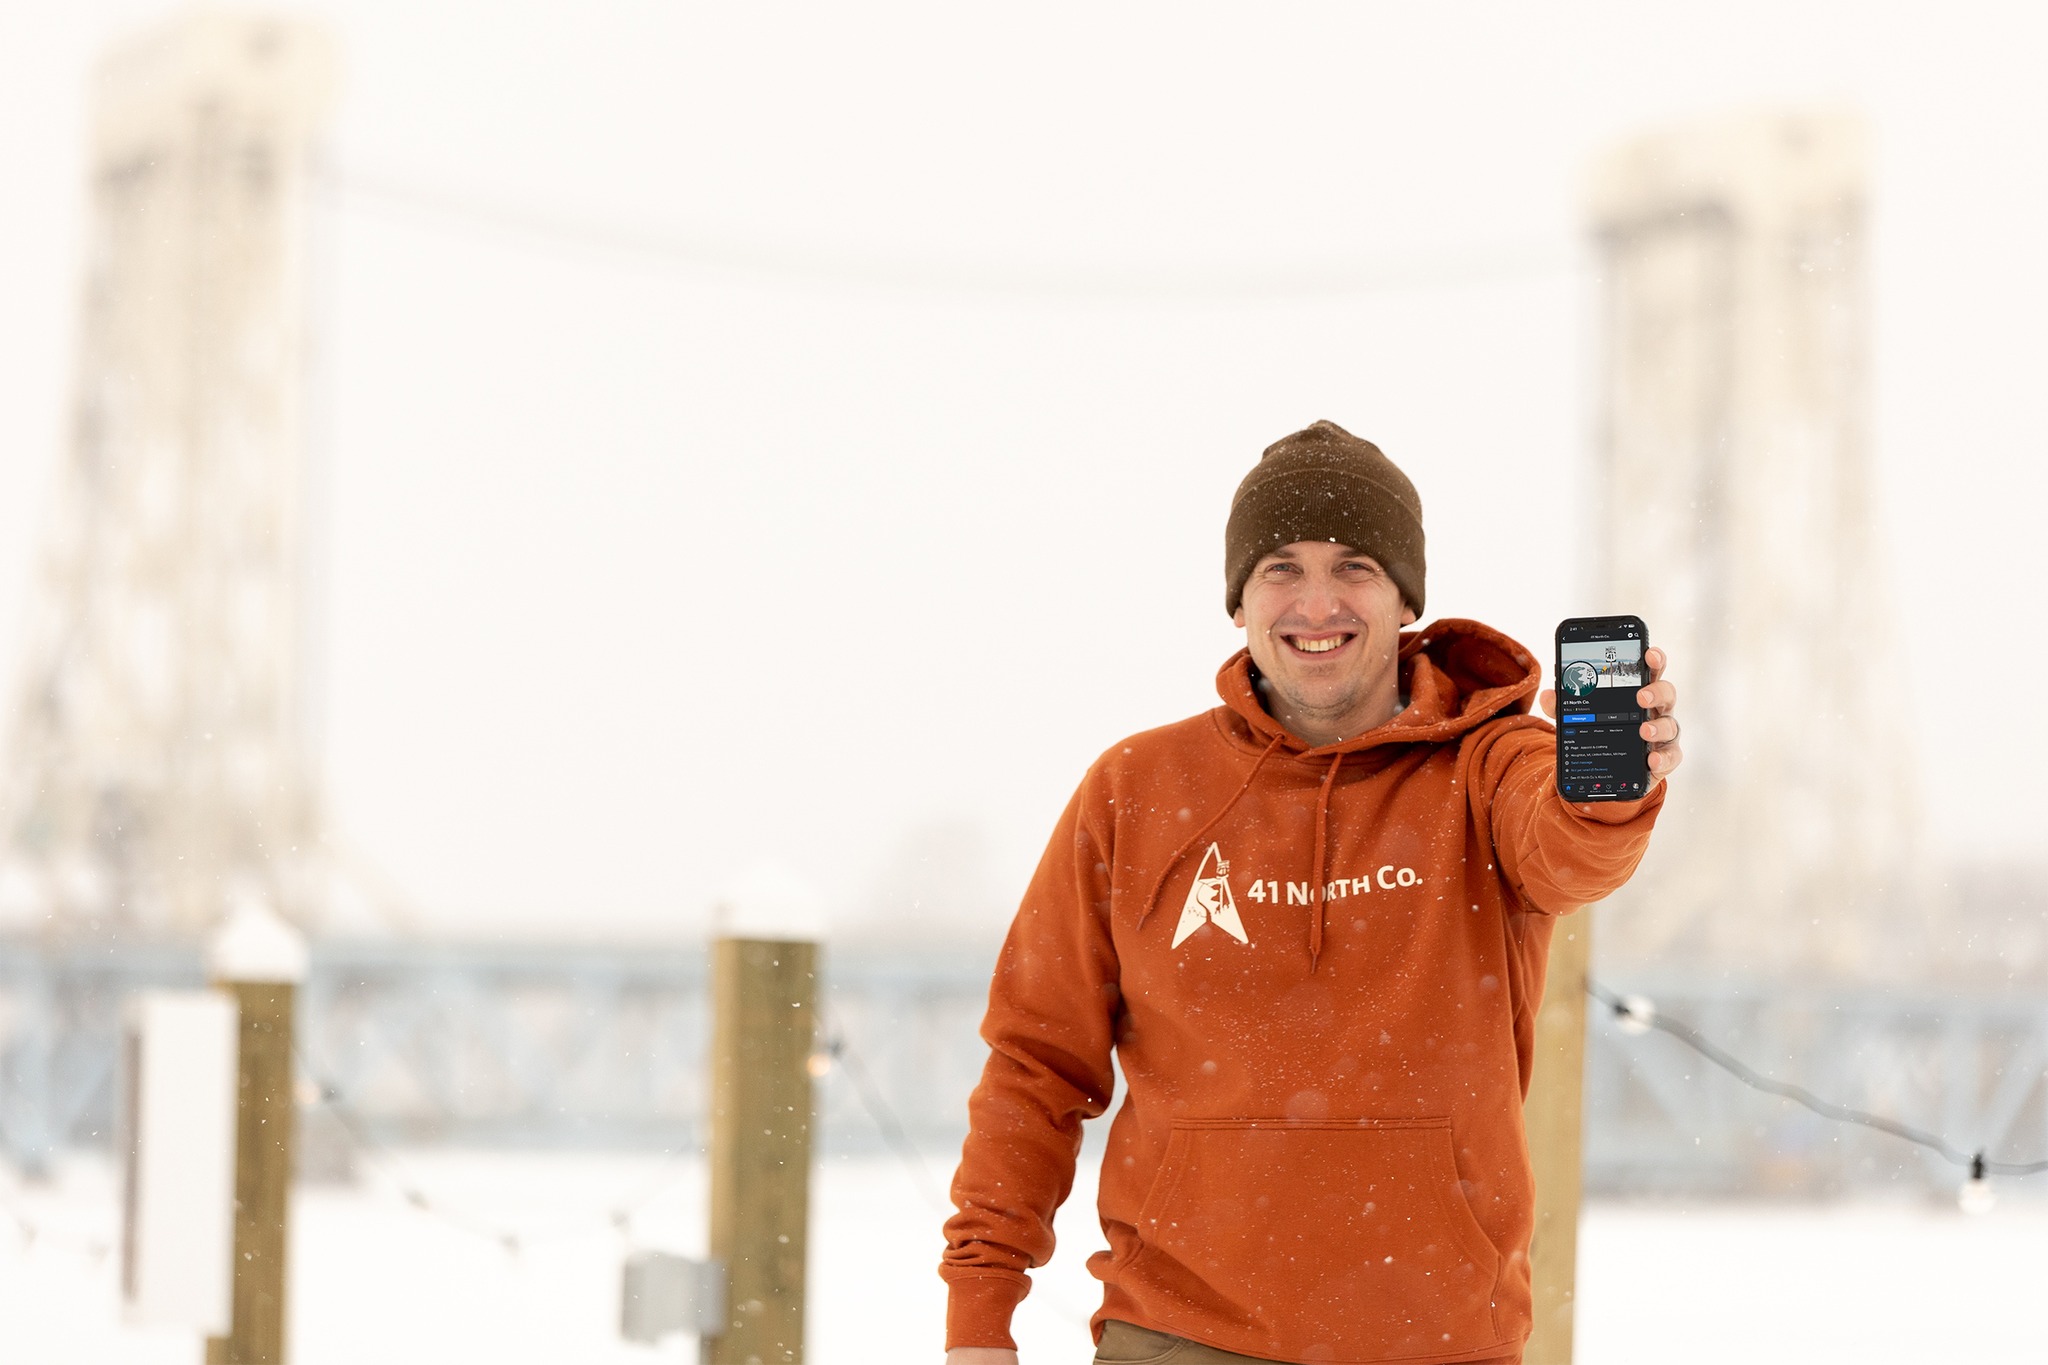 Man holding cellphone out in front of a bridge